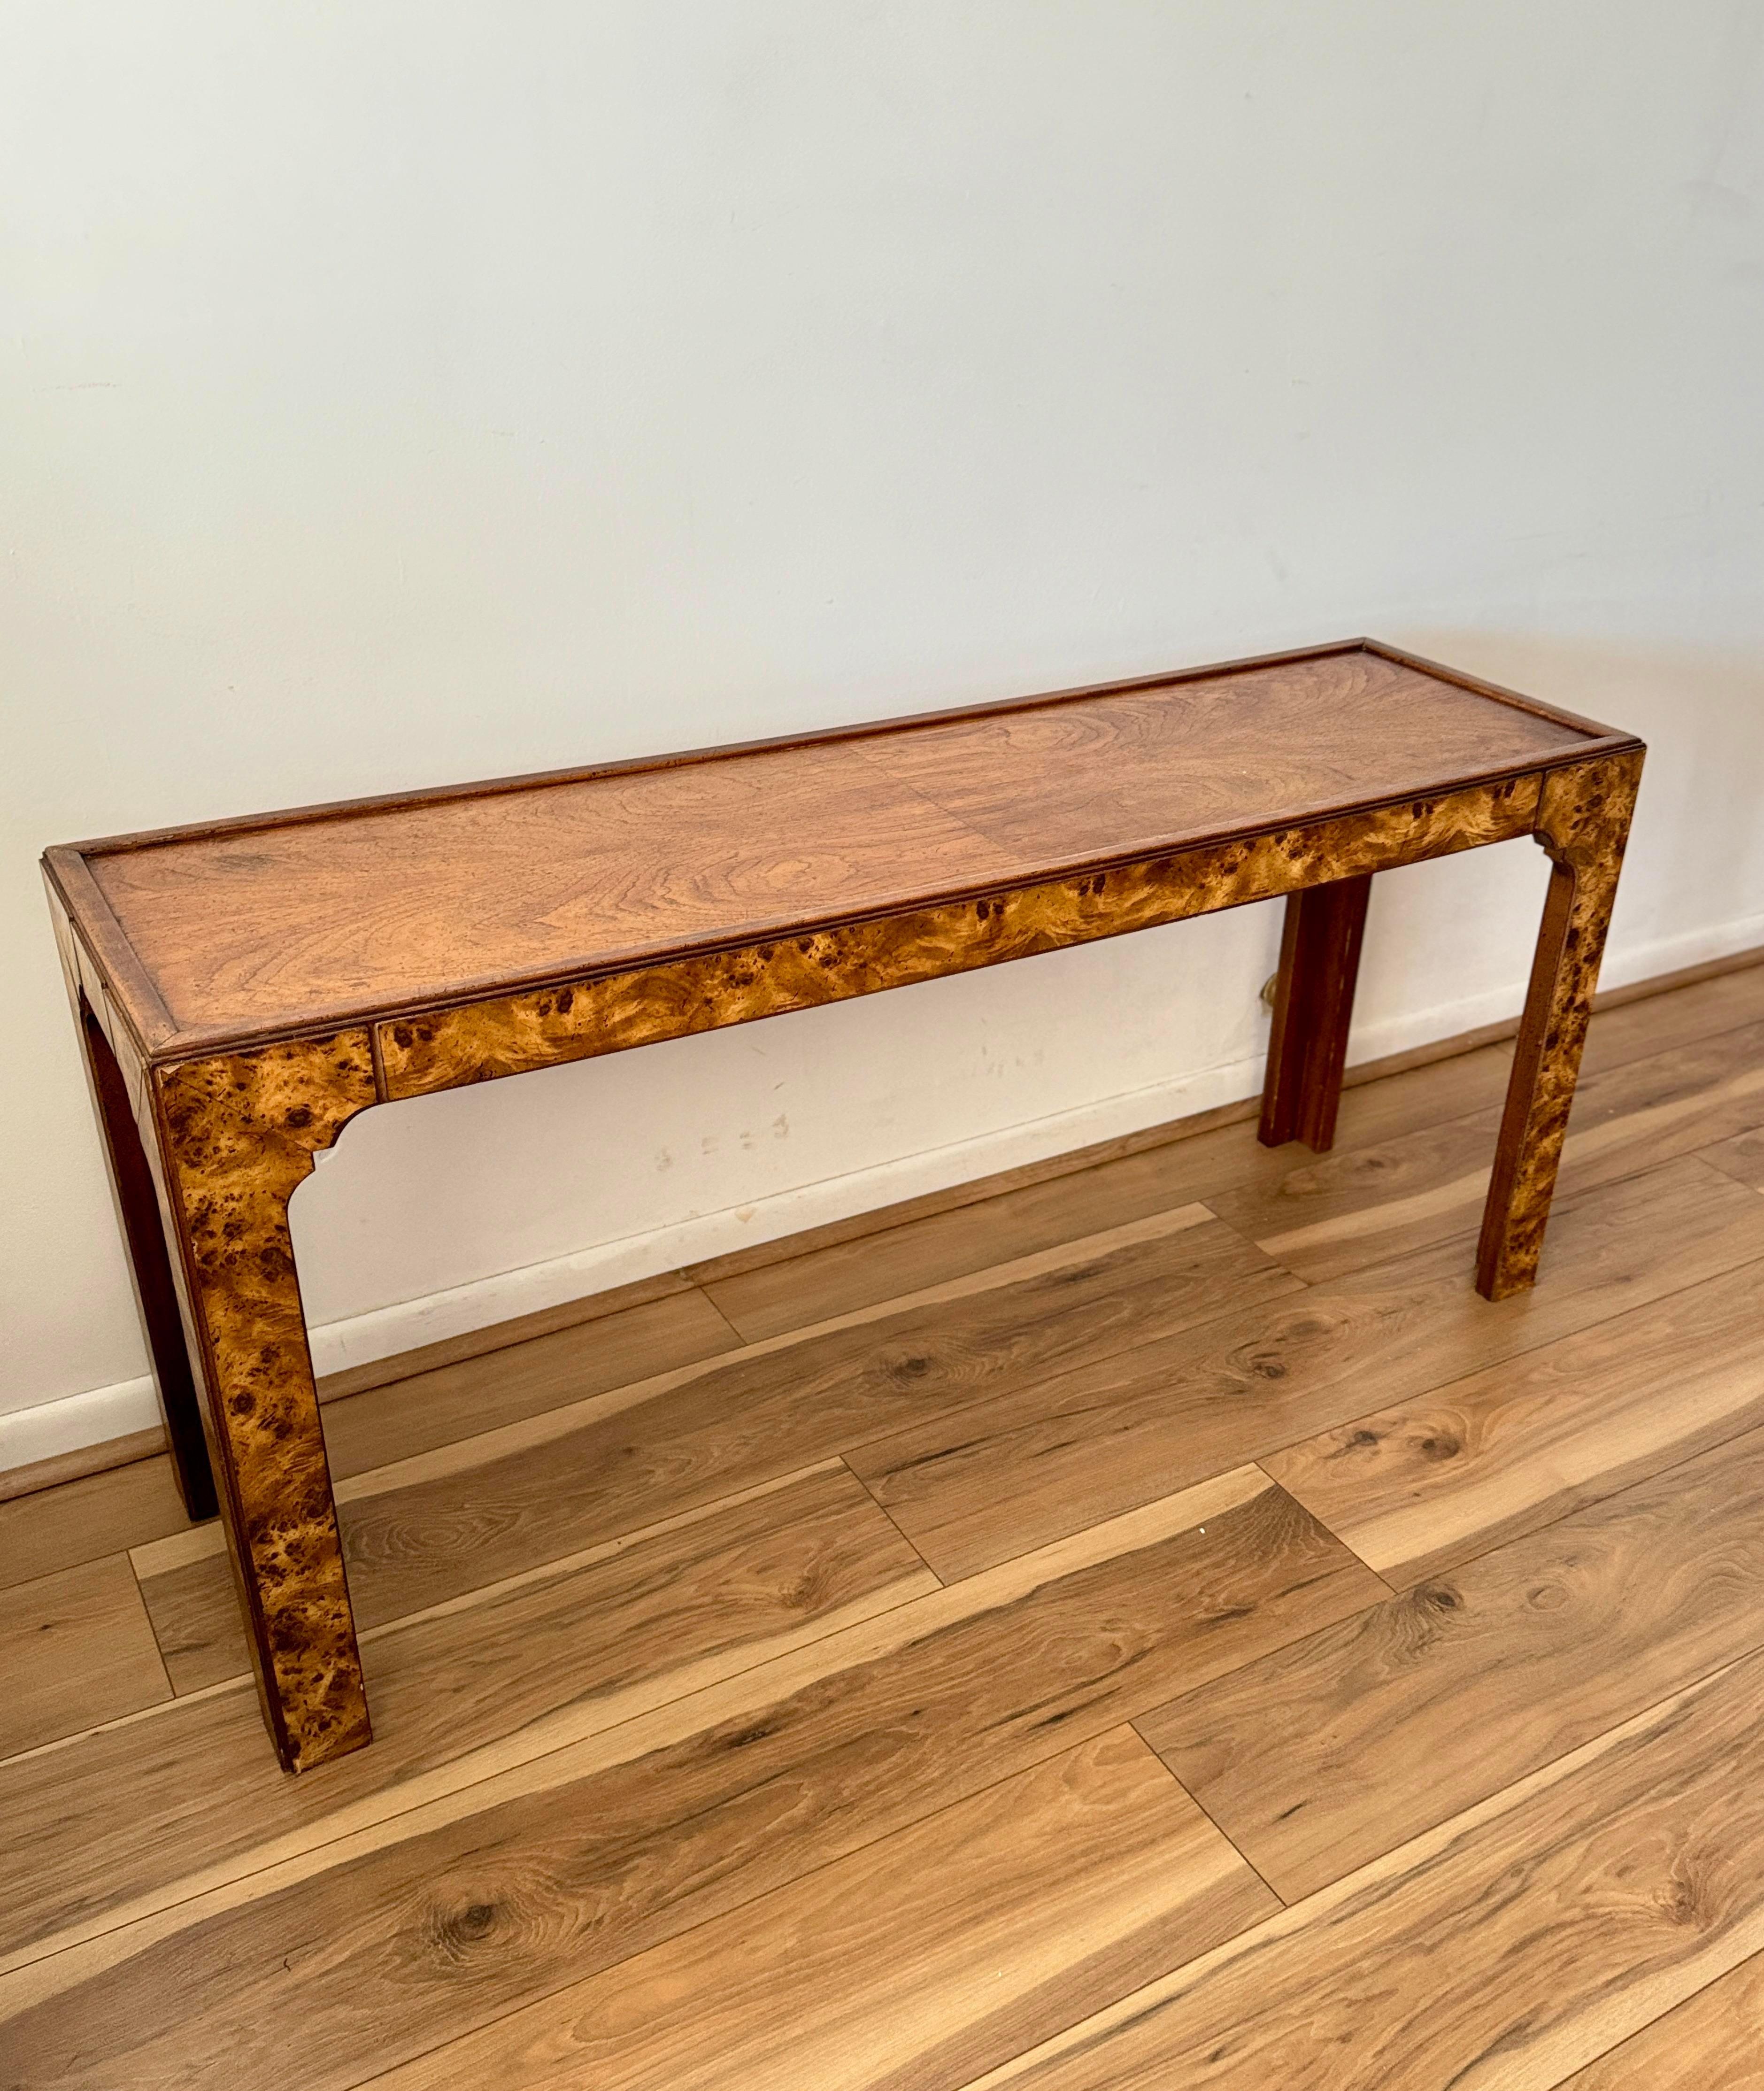 Milo Baughman style burl pattern veneer console table. Features rich shades of brown with a stunning veneer burl pattern. Circa 1970s.